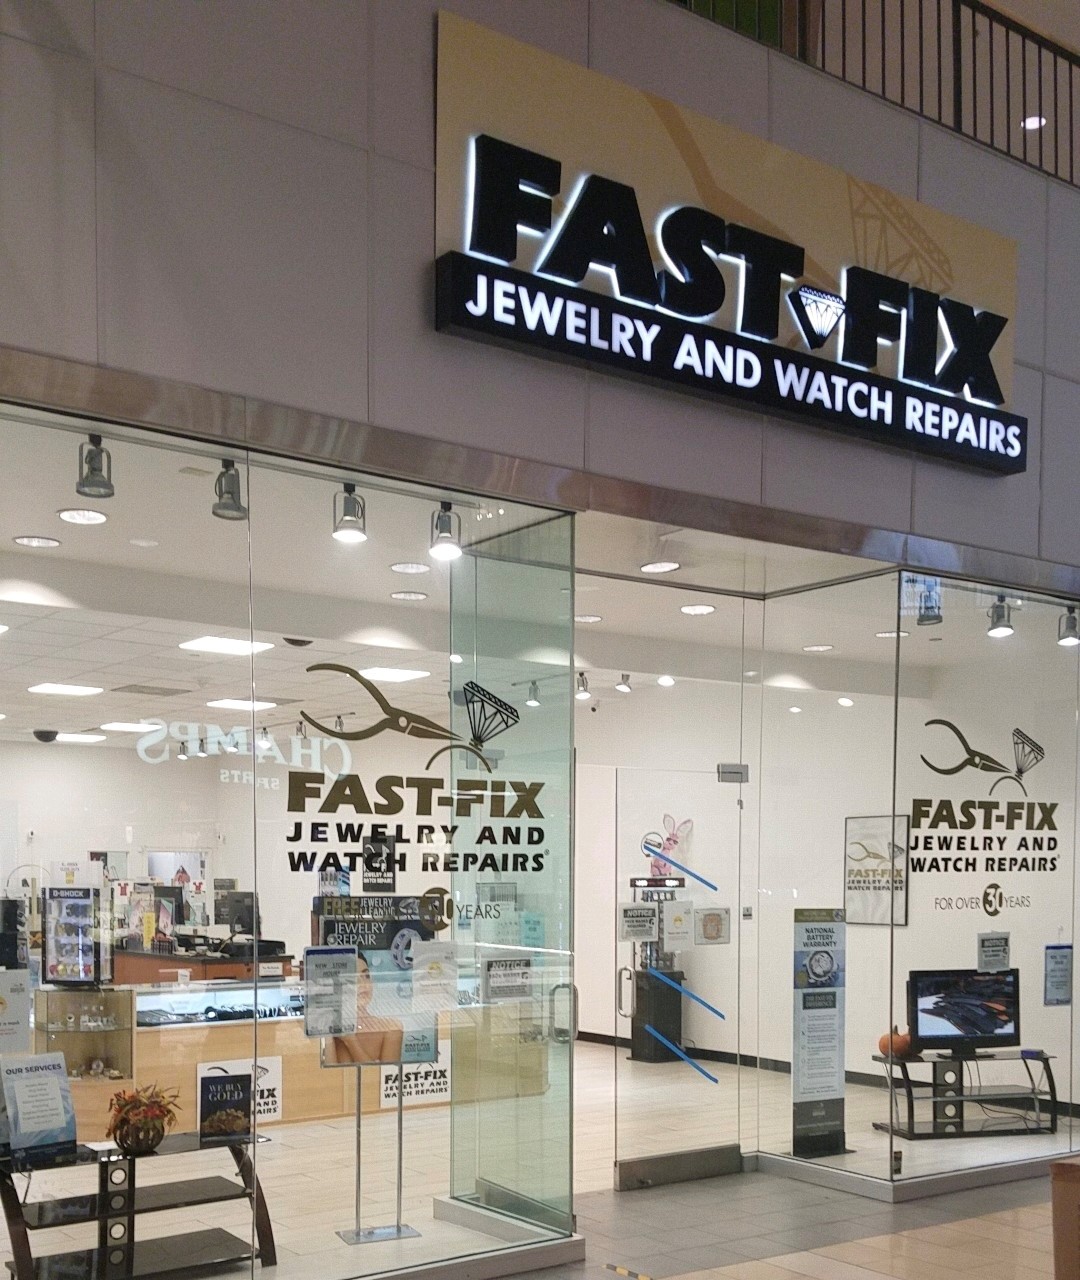 All glass store front with Fast-Fix sign on top. 